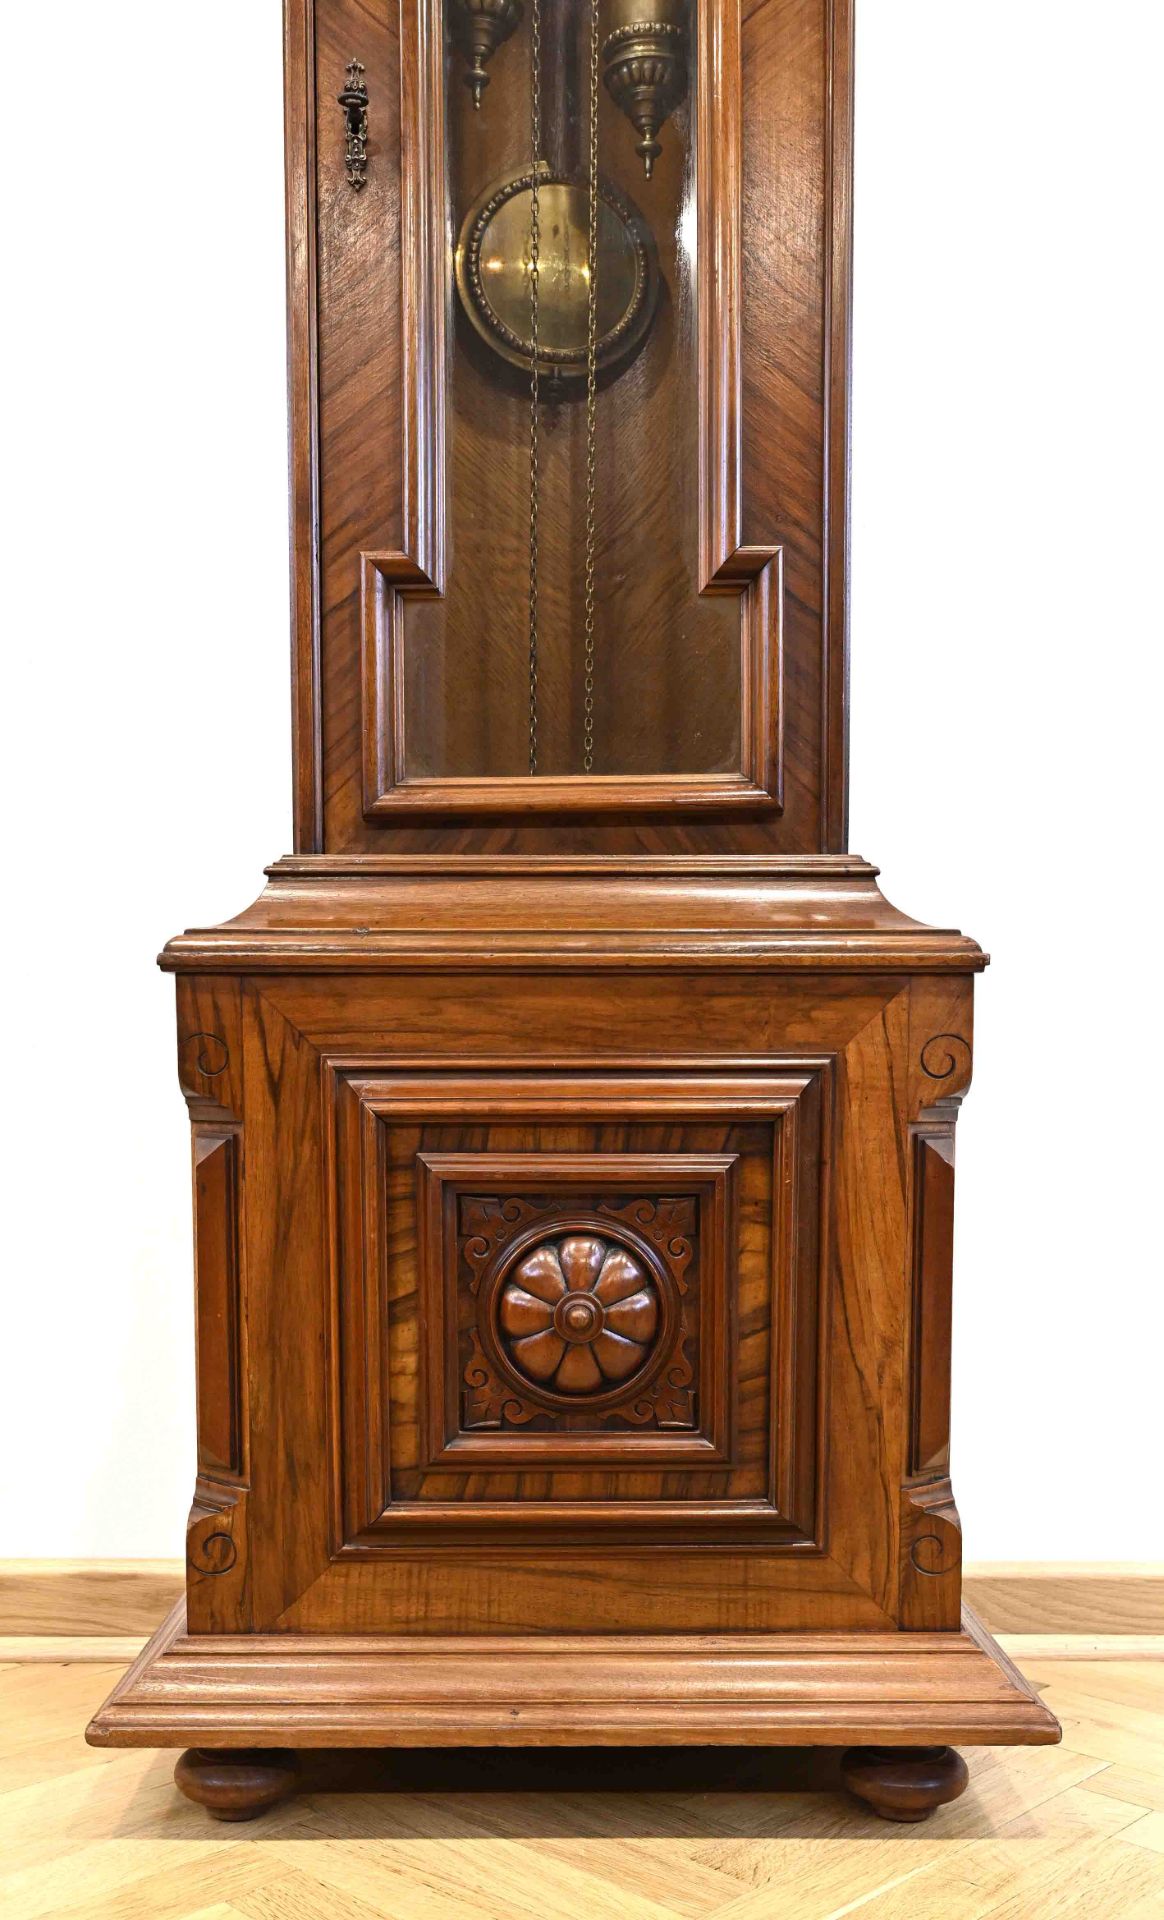 Impressive grandfather clock from the Wilhelminian period, around 1900 in Berlin, solid walnut with - Image 4 of 7